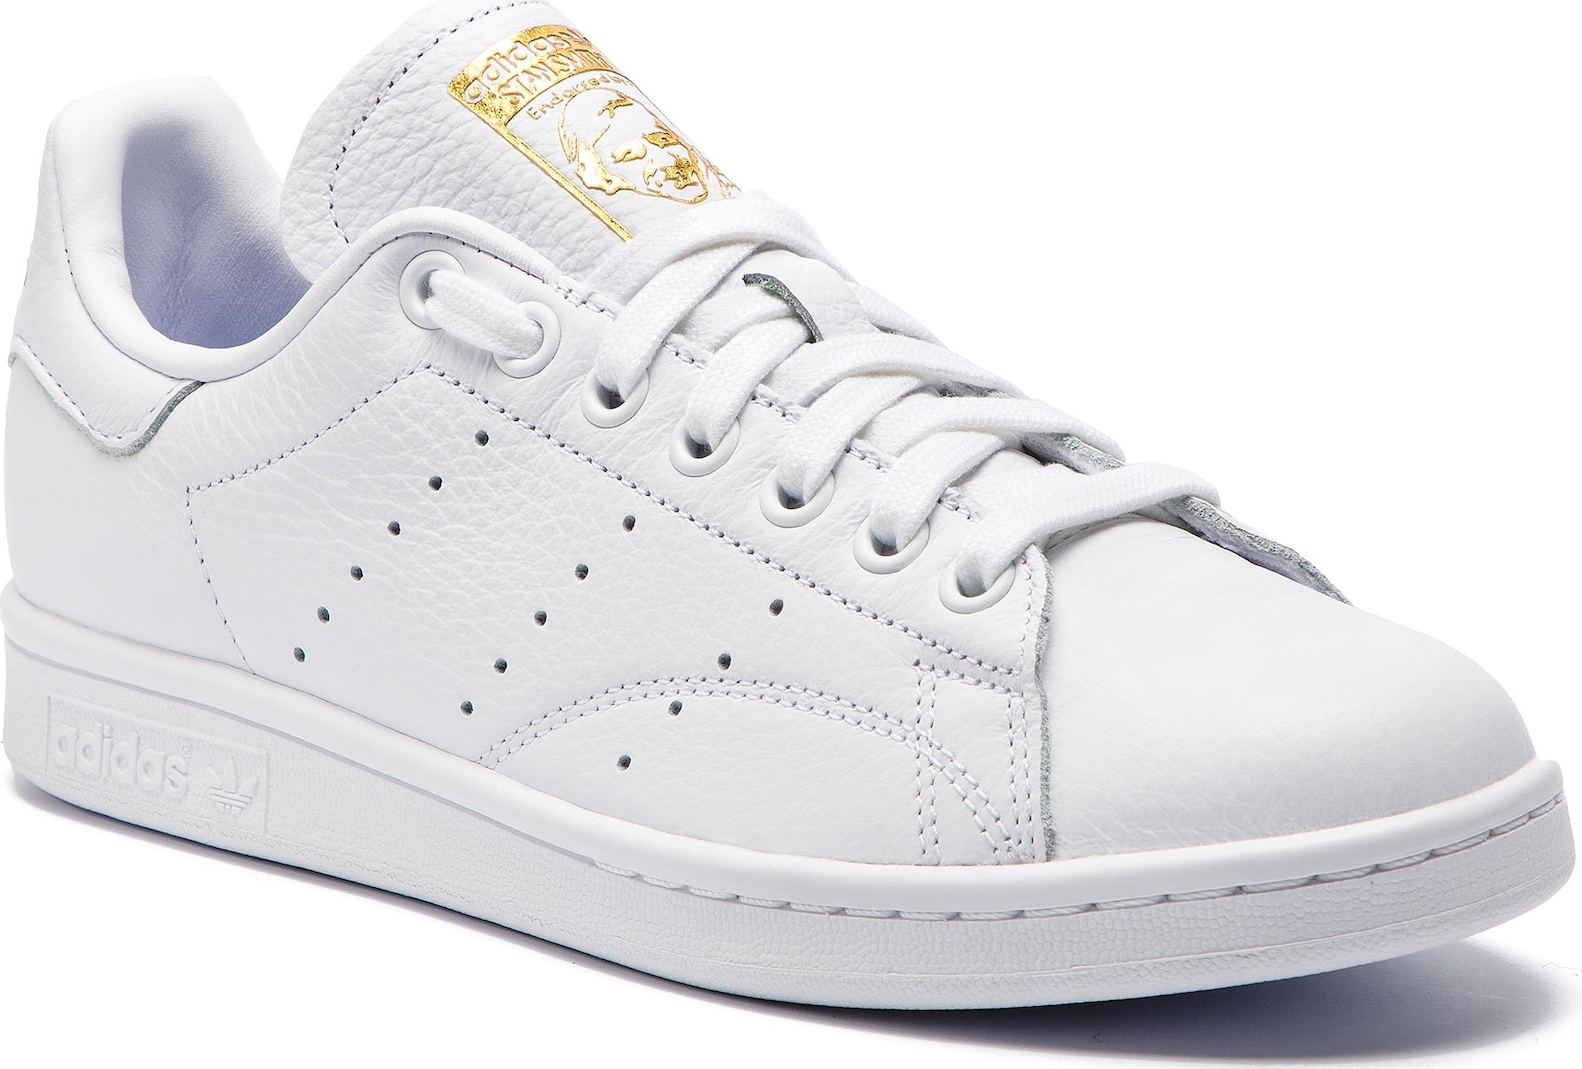 stan smith greece off 77% - icrating.se